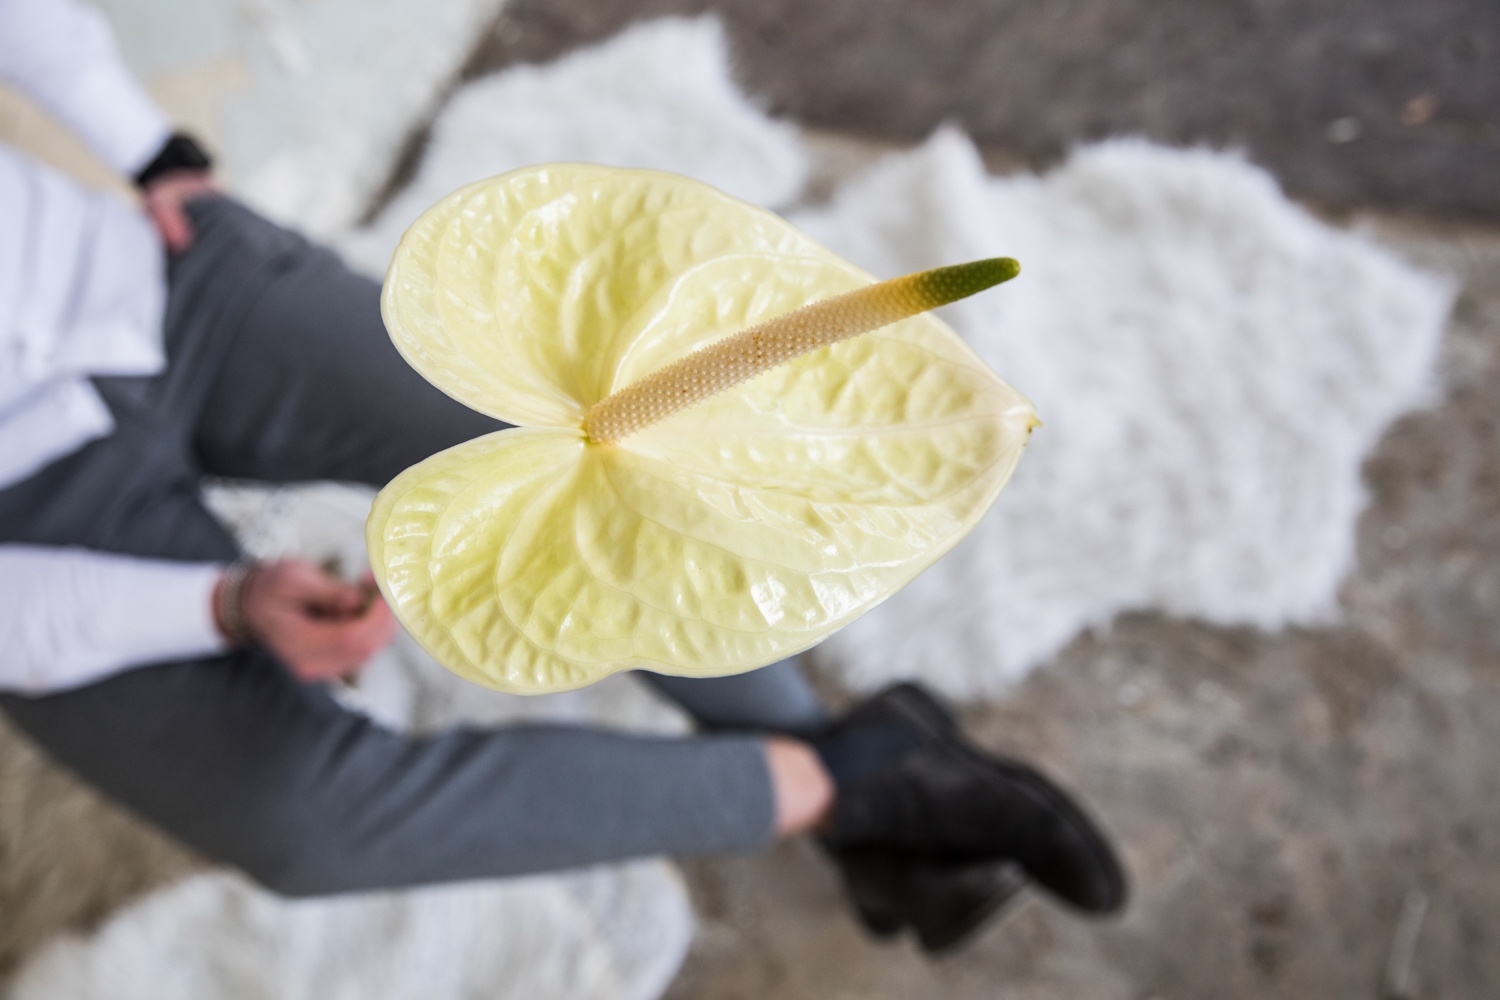 4 reasons why the anthurium makes the ultimate flower or plant for Valentine's Day